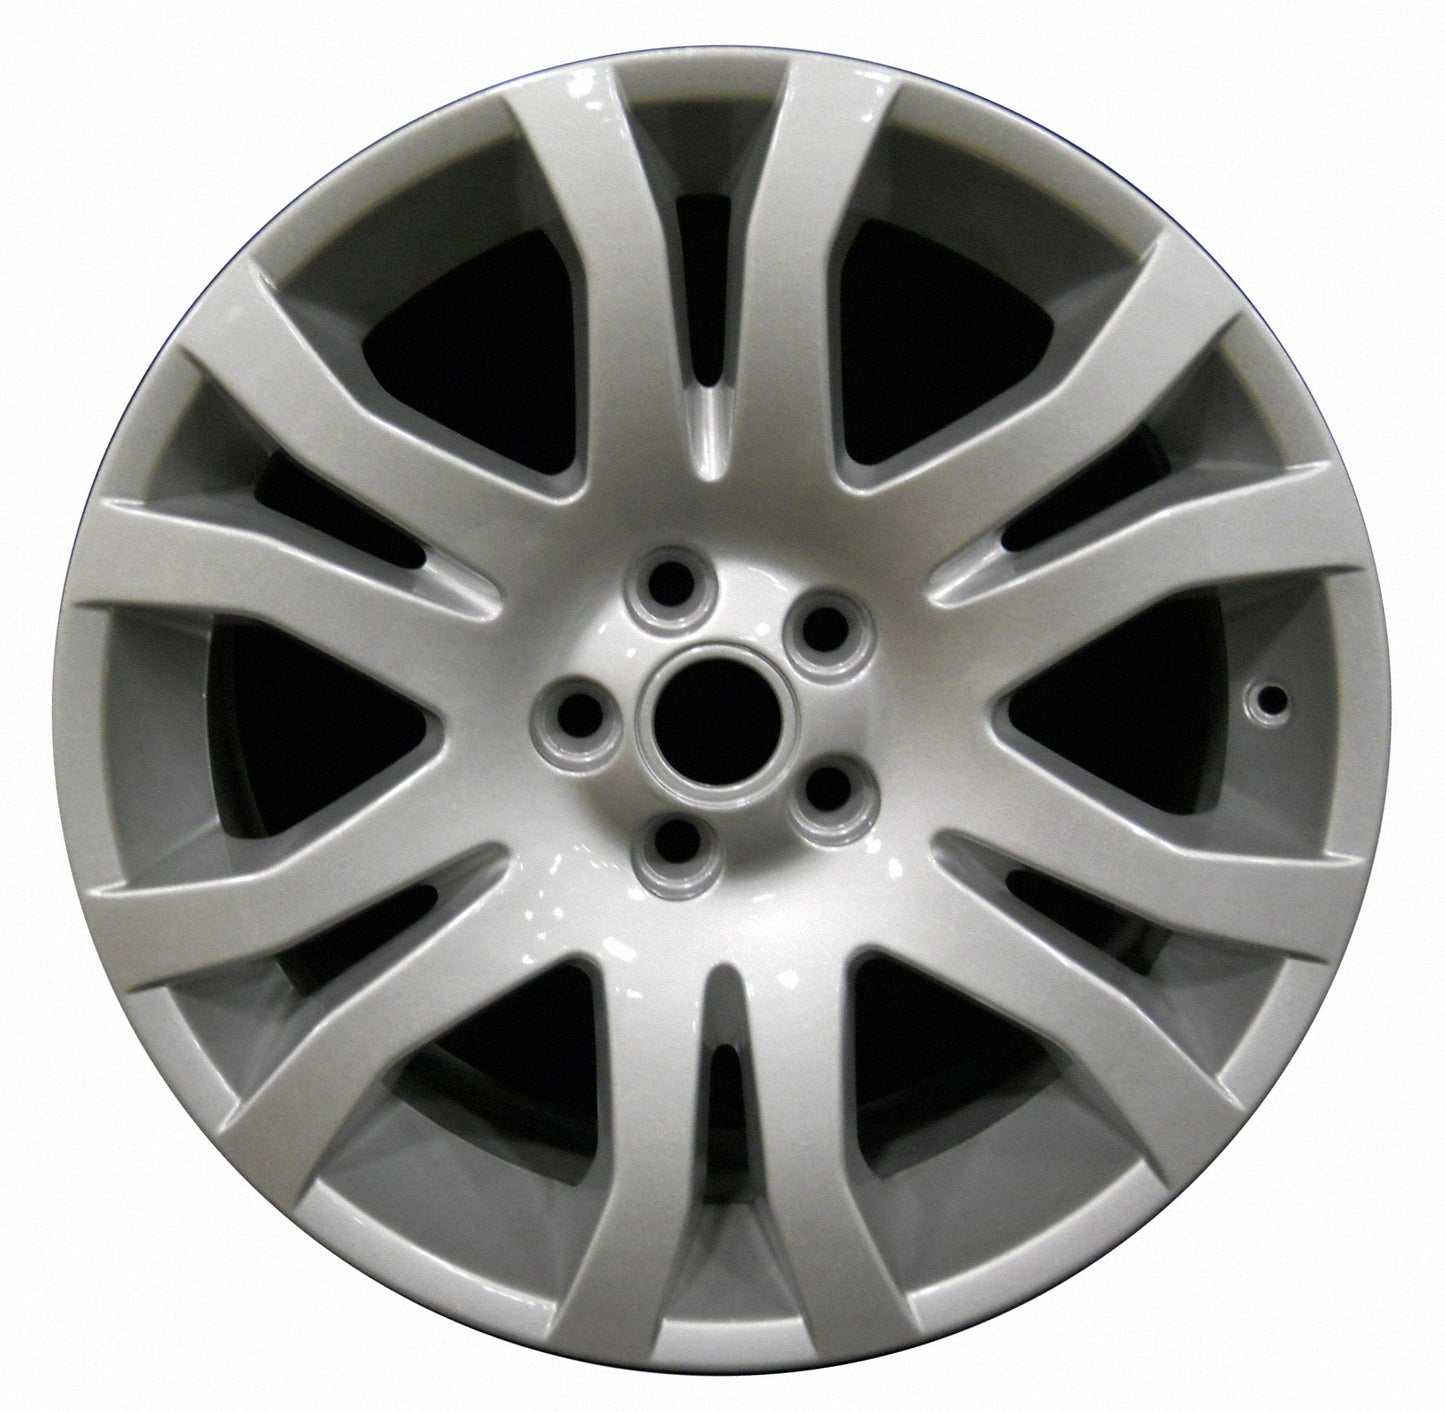 Land Rover LR2  2008, 2009, 2010, 2011 Factory OEM Car Wheel Size 18x8 Alloy WAO.72202.PS13.FF